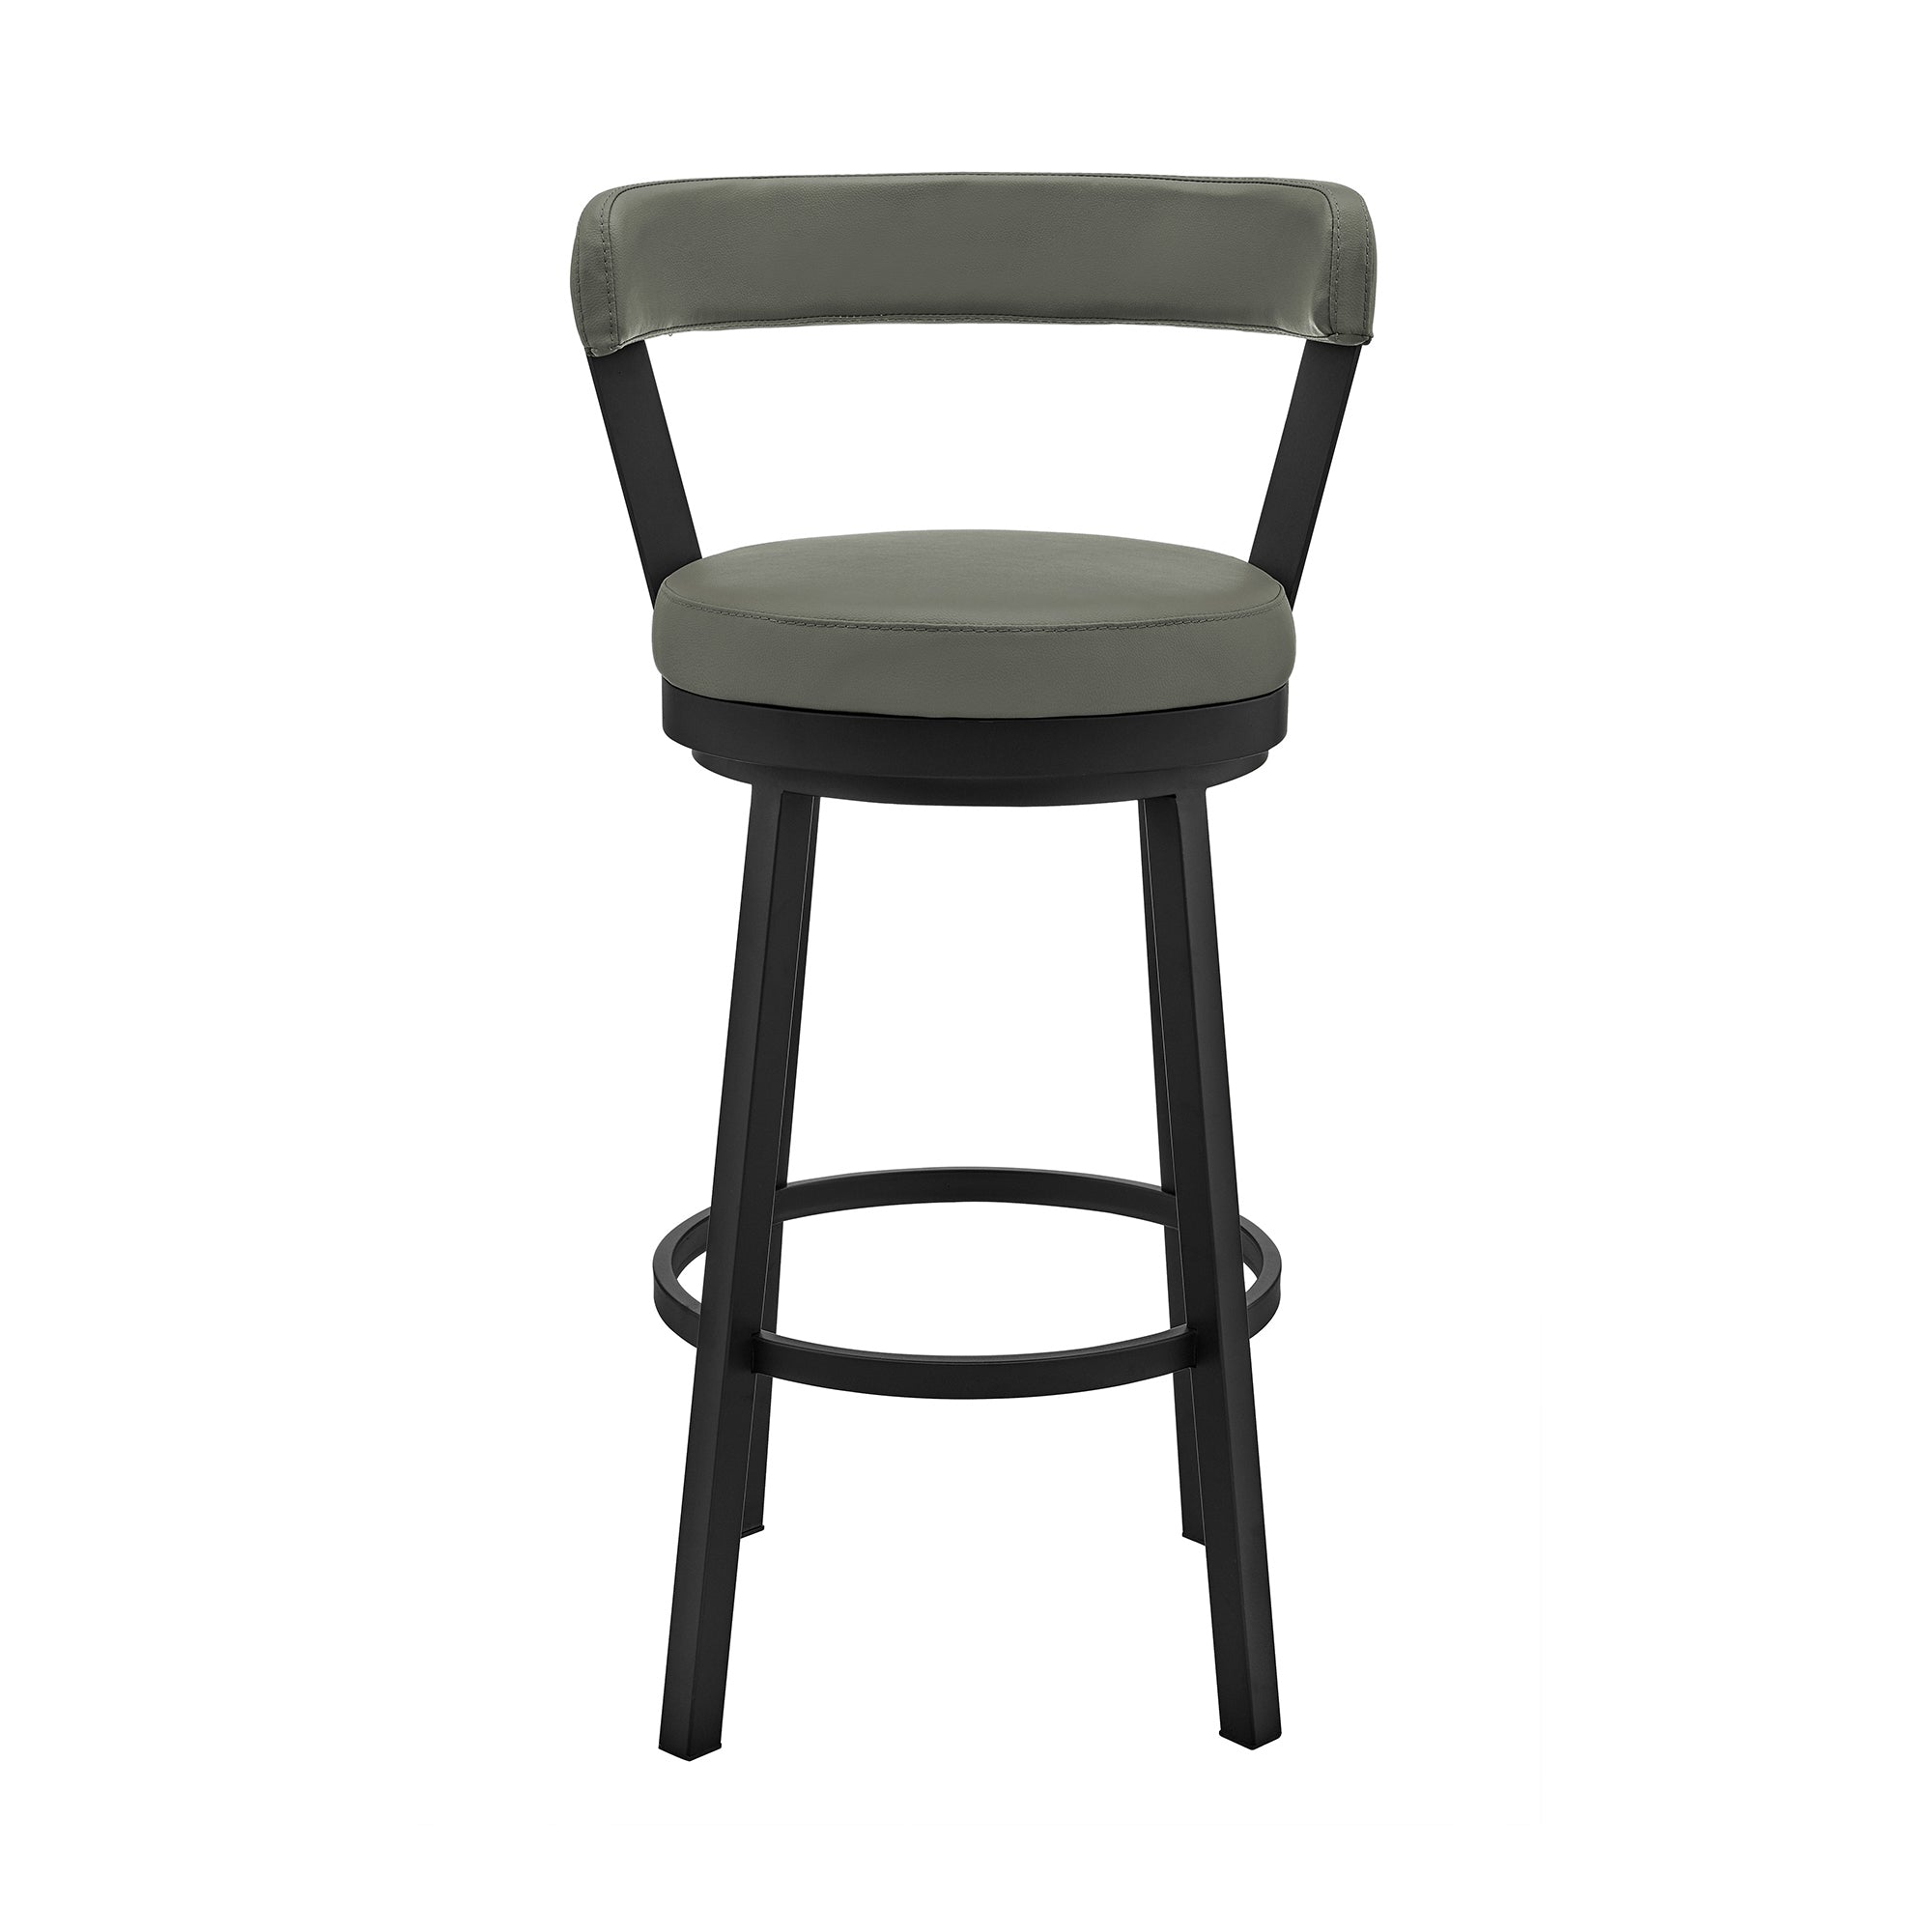 Bryant 30 Inches Bar Height Swivel Bar Stool in Black Finish and Gray Faux Leather